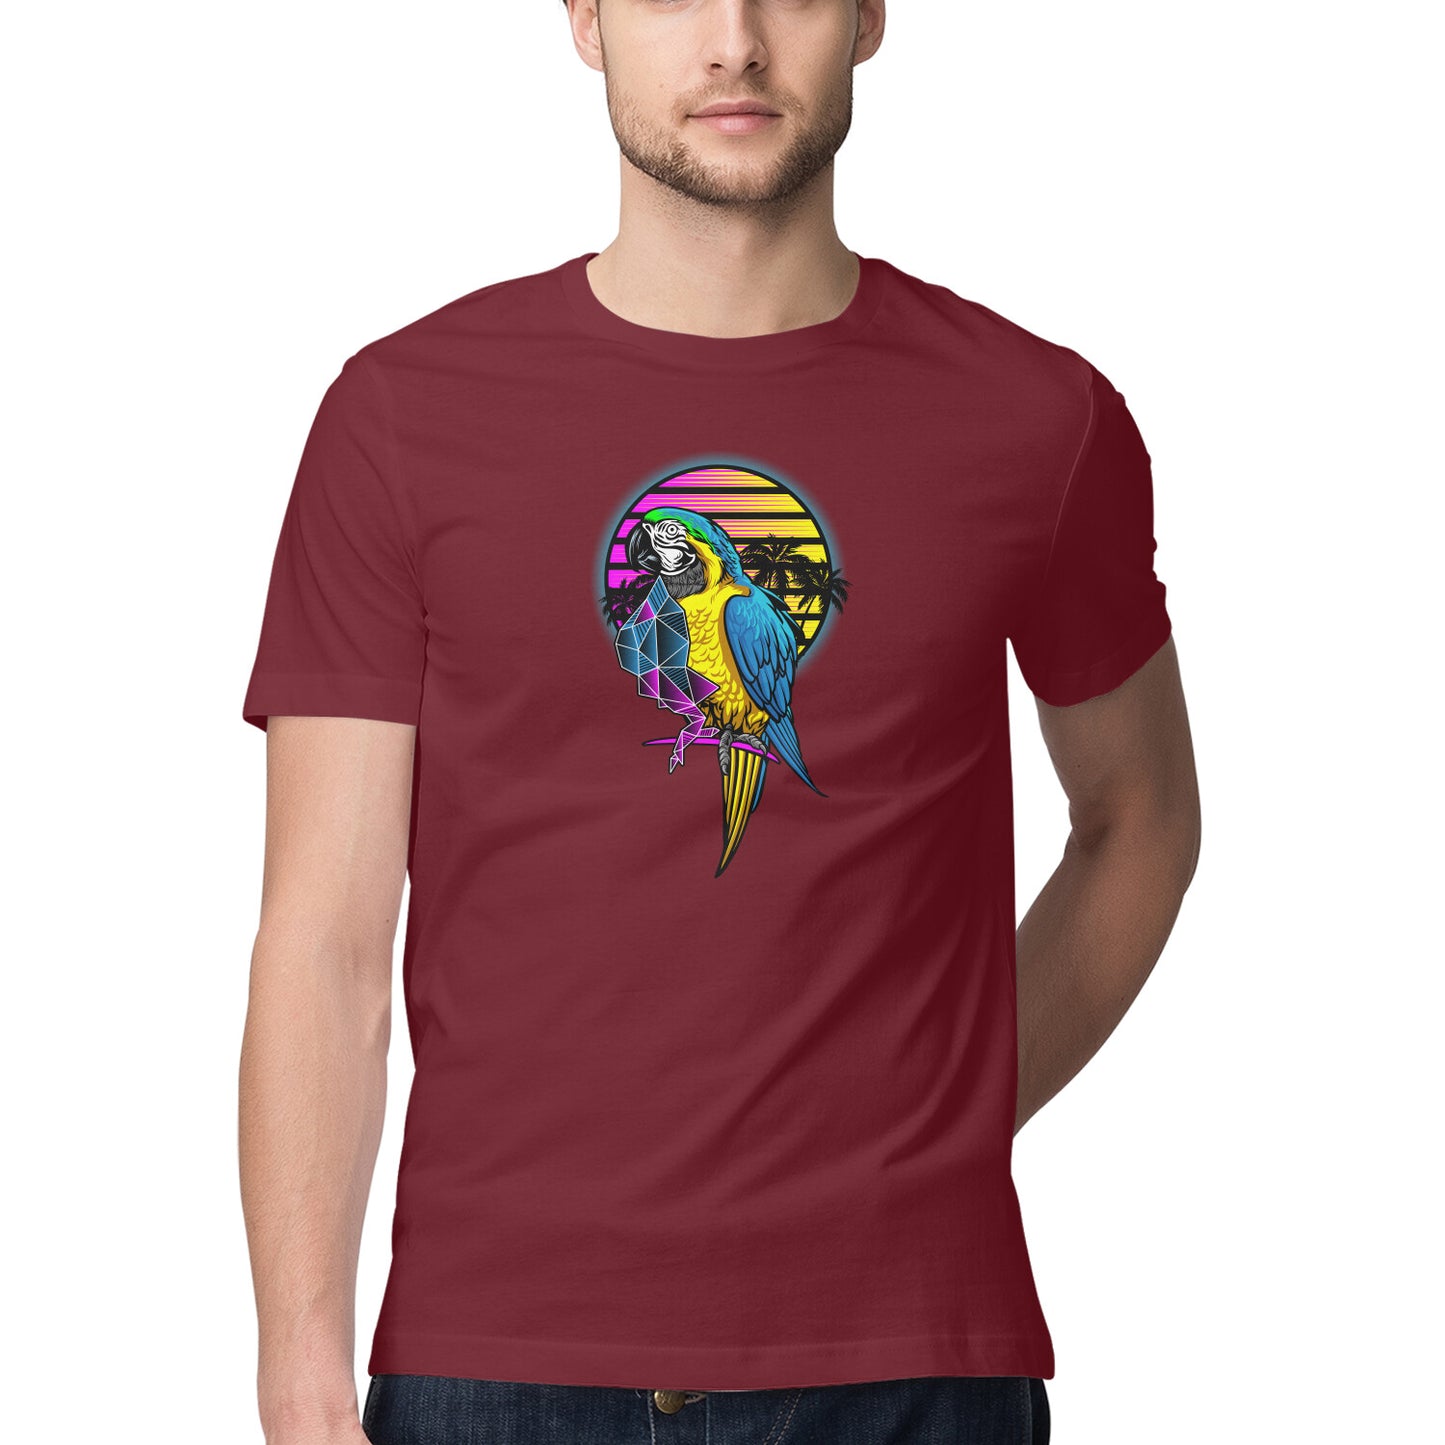 Parrot Printed Graphic T-Shirt